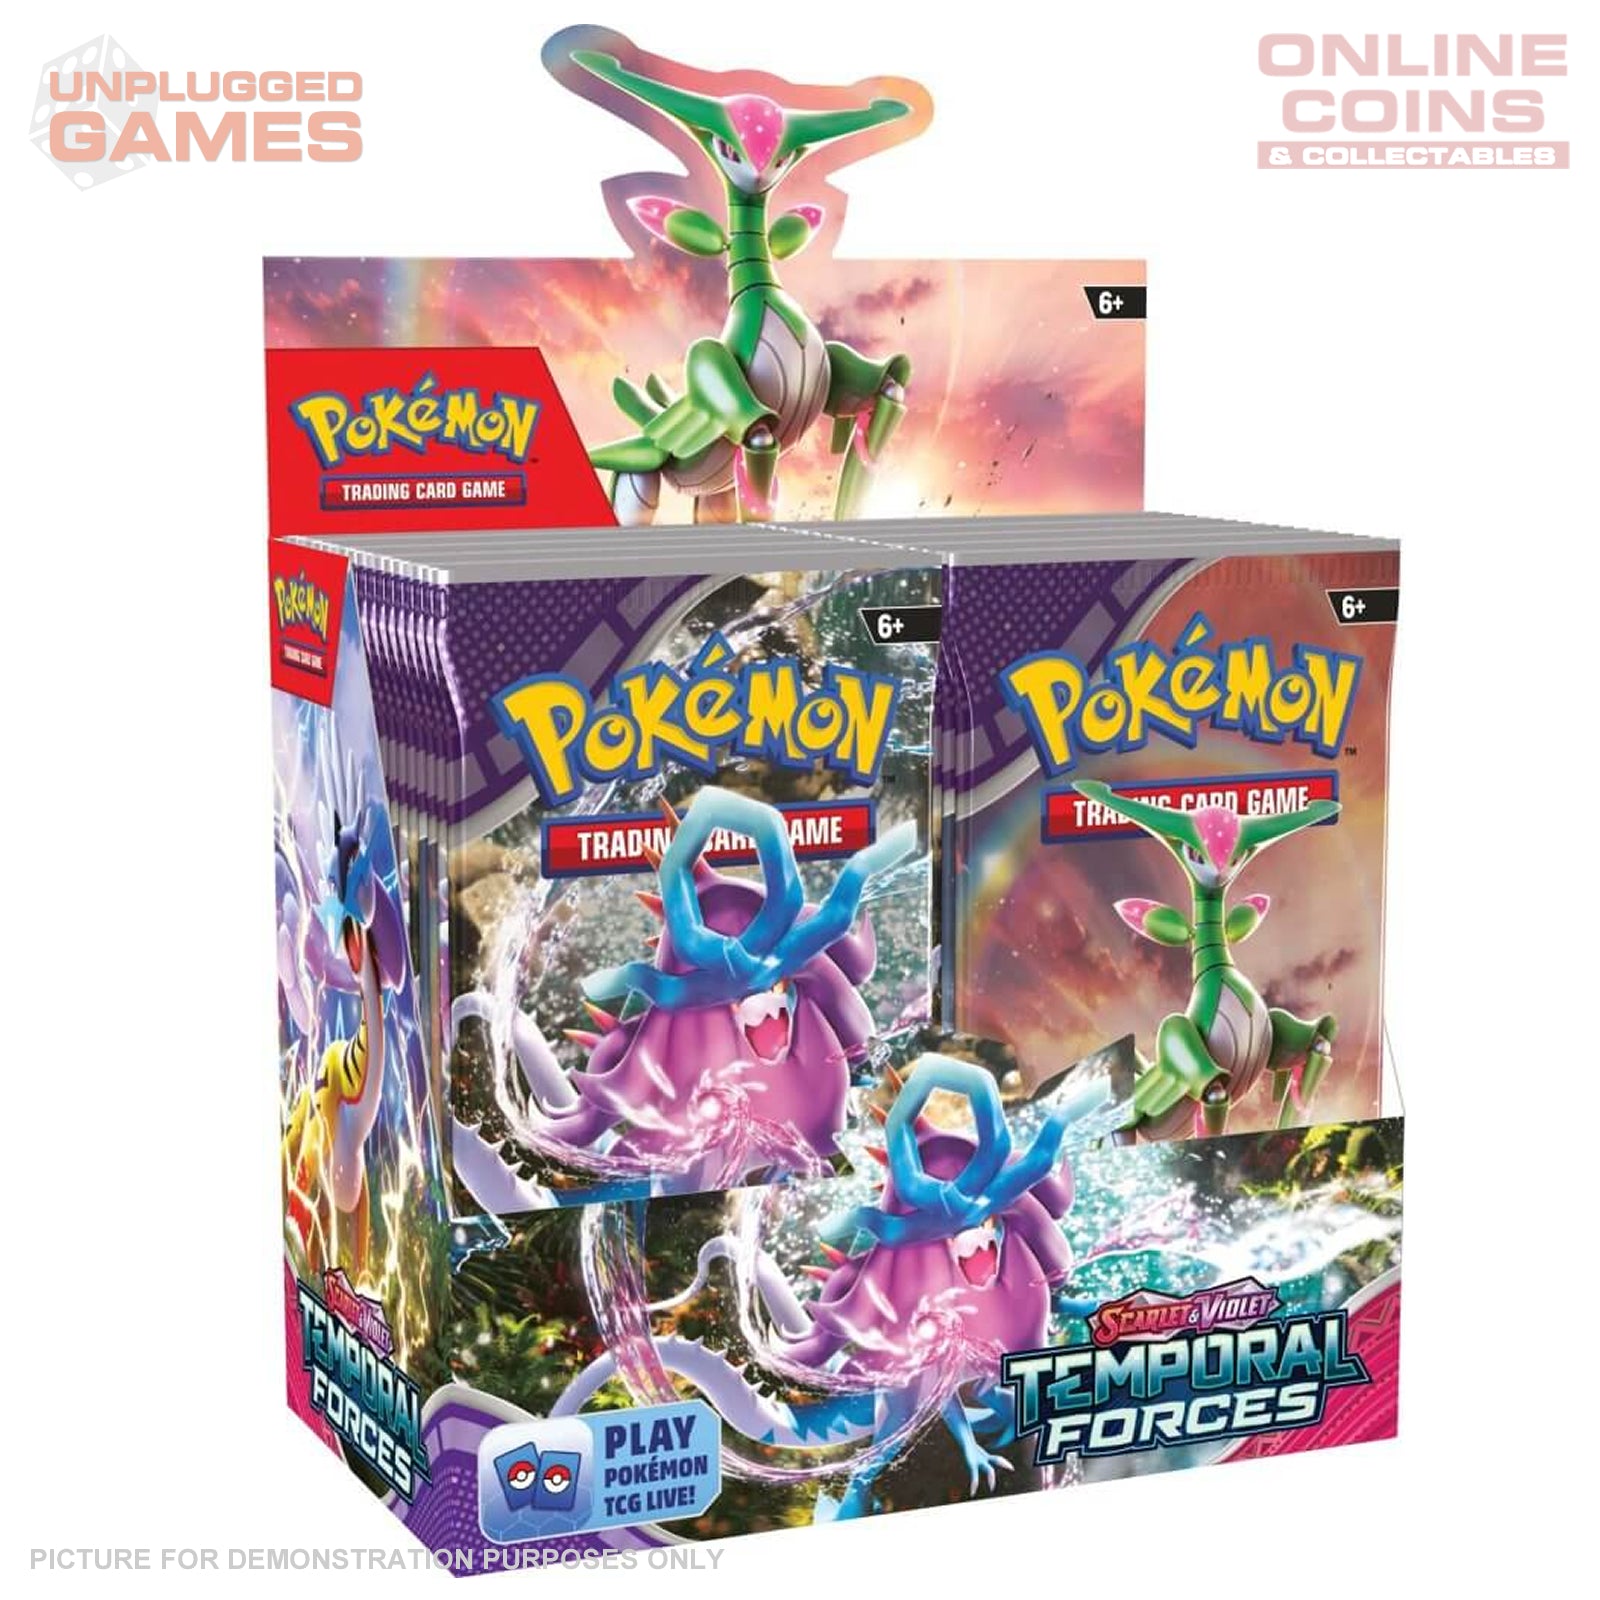 Pokemon TCG - Temporal Forces - Booster BOX of 36 Packs